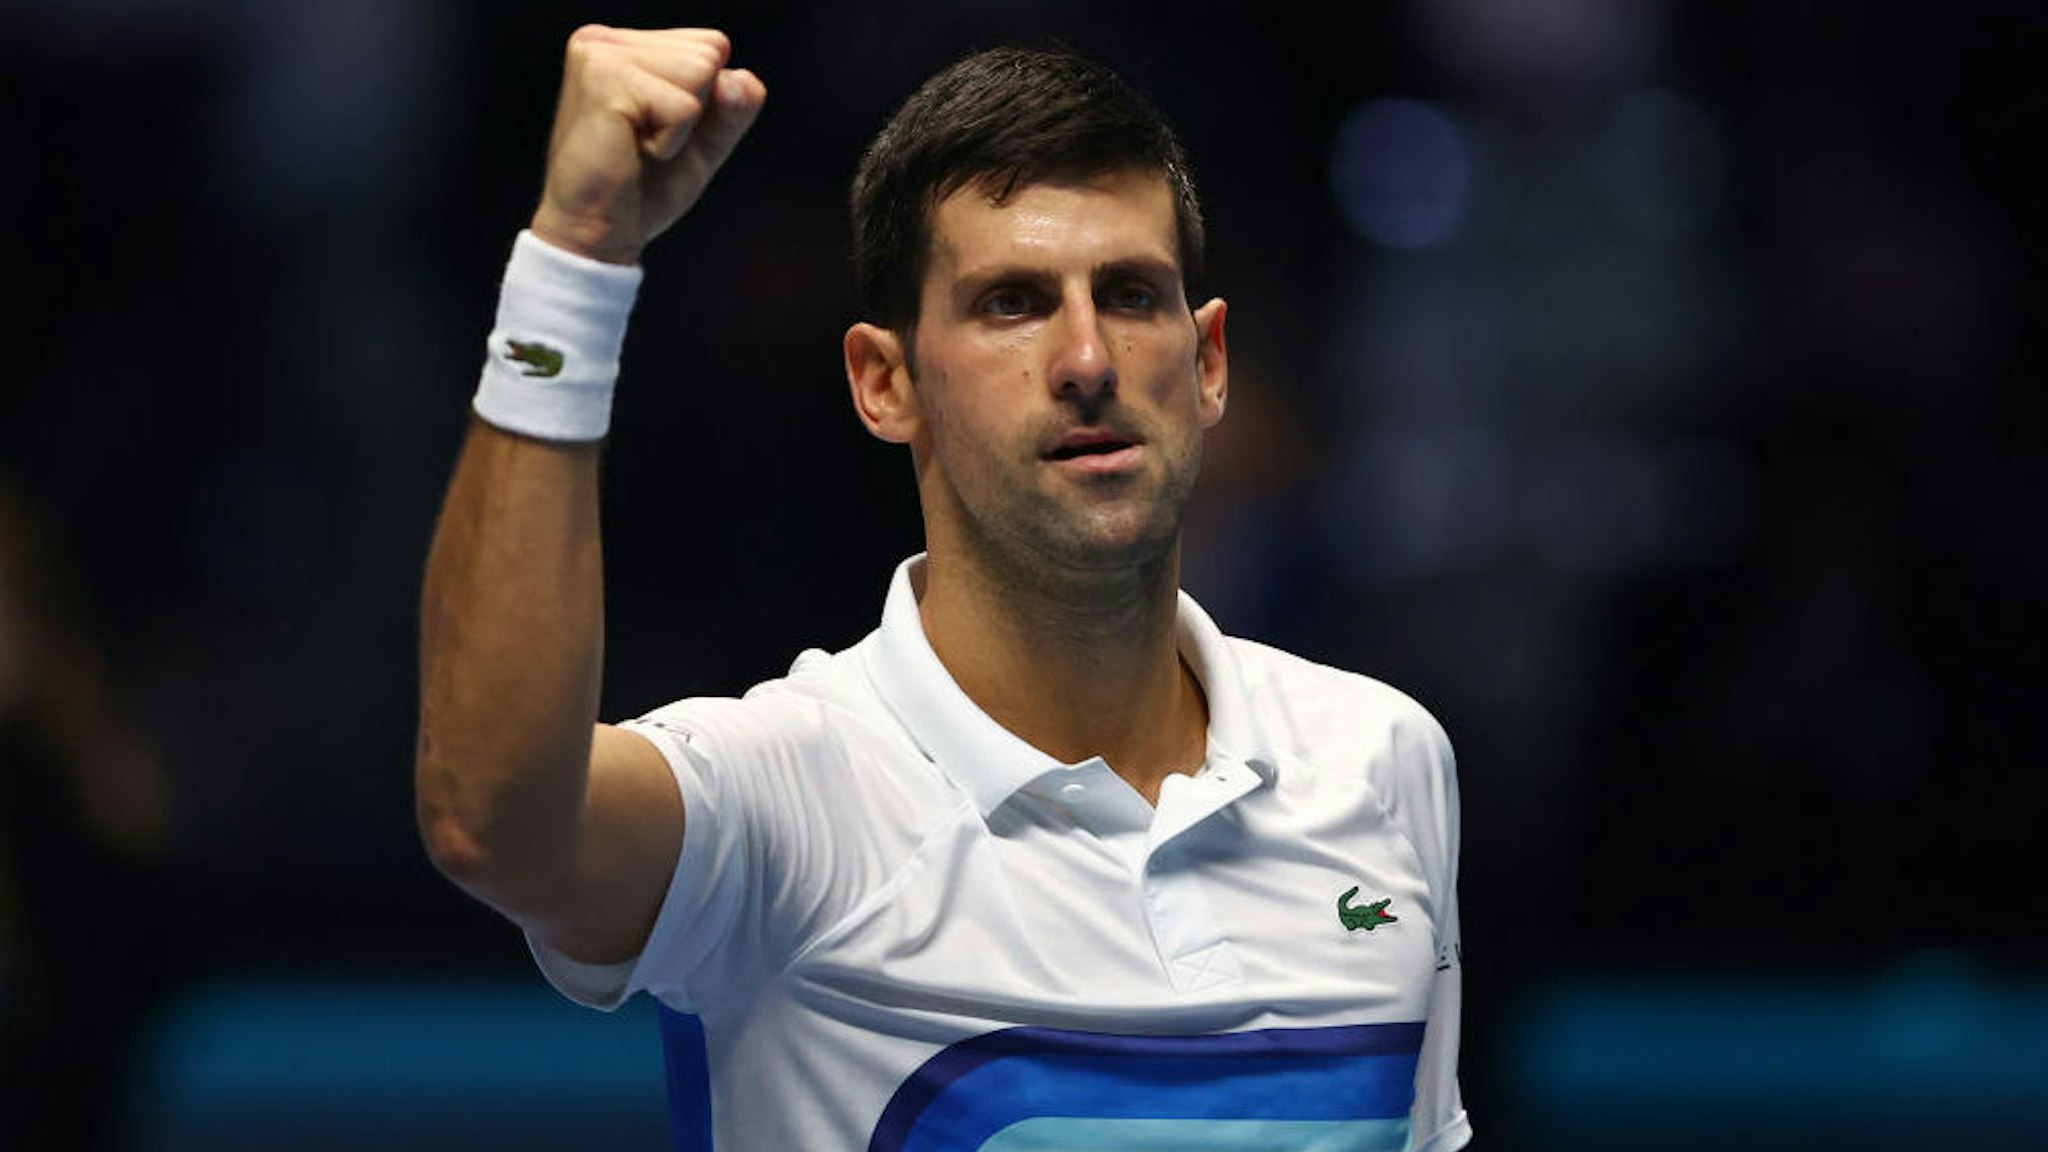 Novak Djokovic of Serbia celebrates winning his singles match against Andrey Rublev of Russia on Day Four of the Nitto ATP World Tour Finals at Pala Alpitour on November 17, 2021 in Turin, Italy.